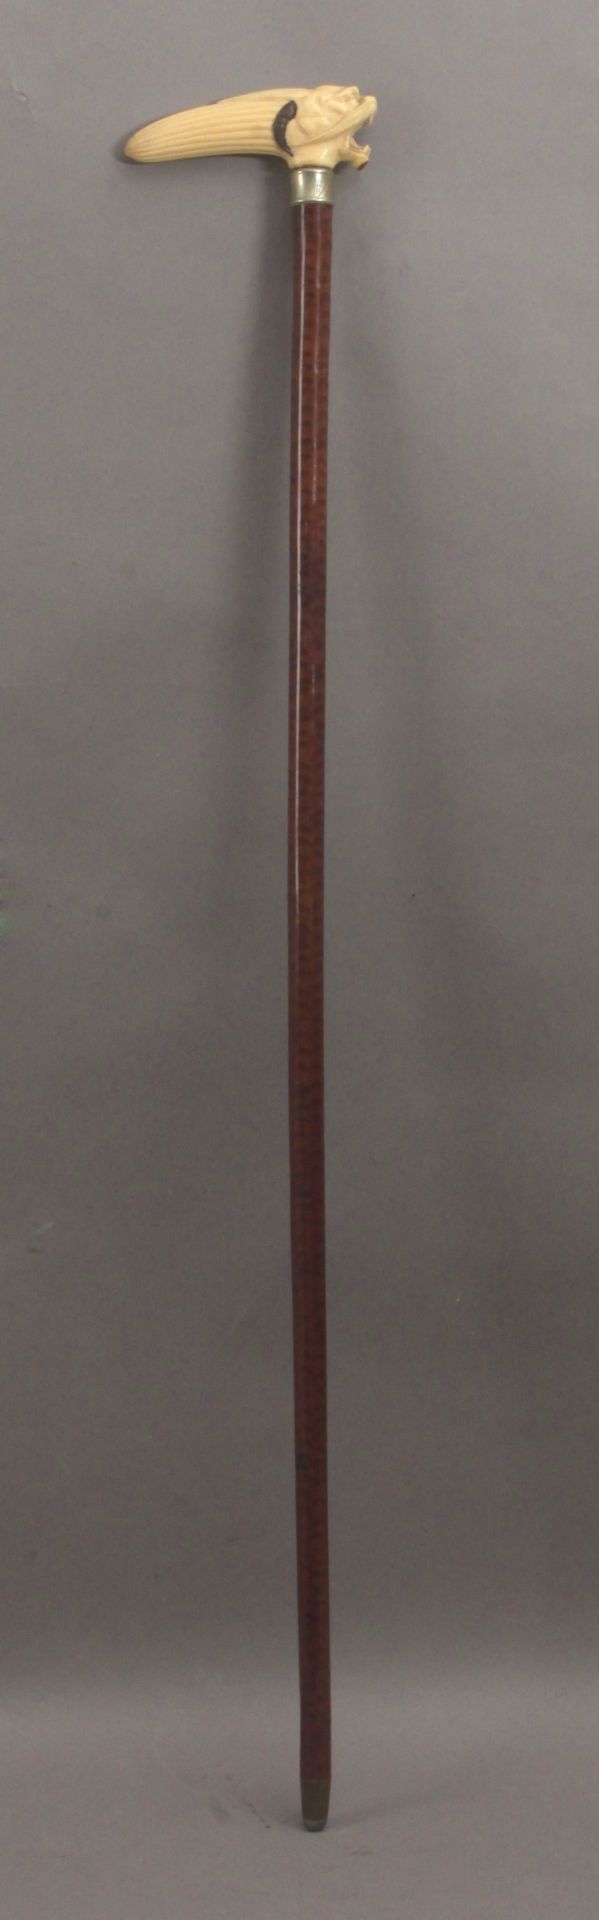 A 19th century walking cane - Image 4 of 7